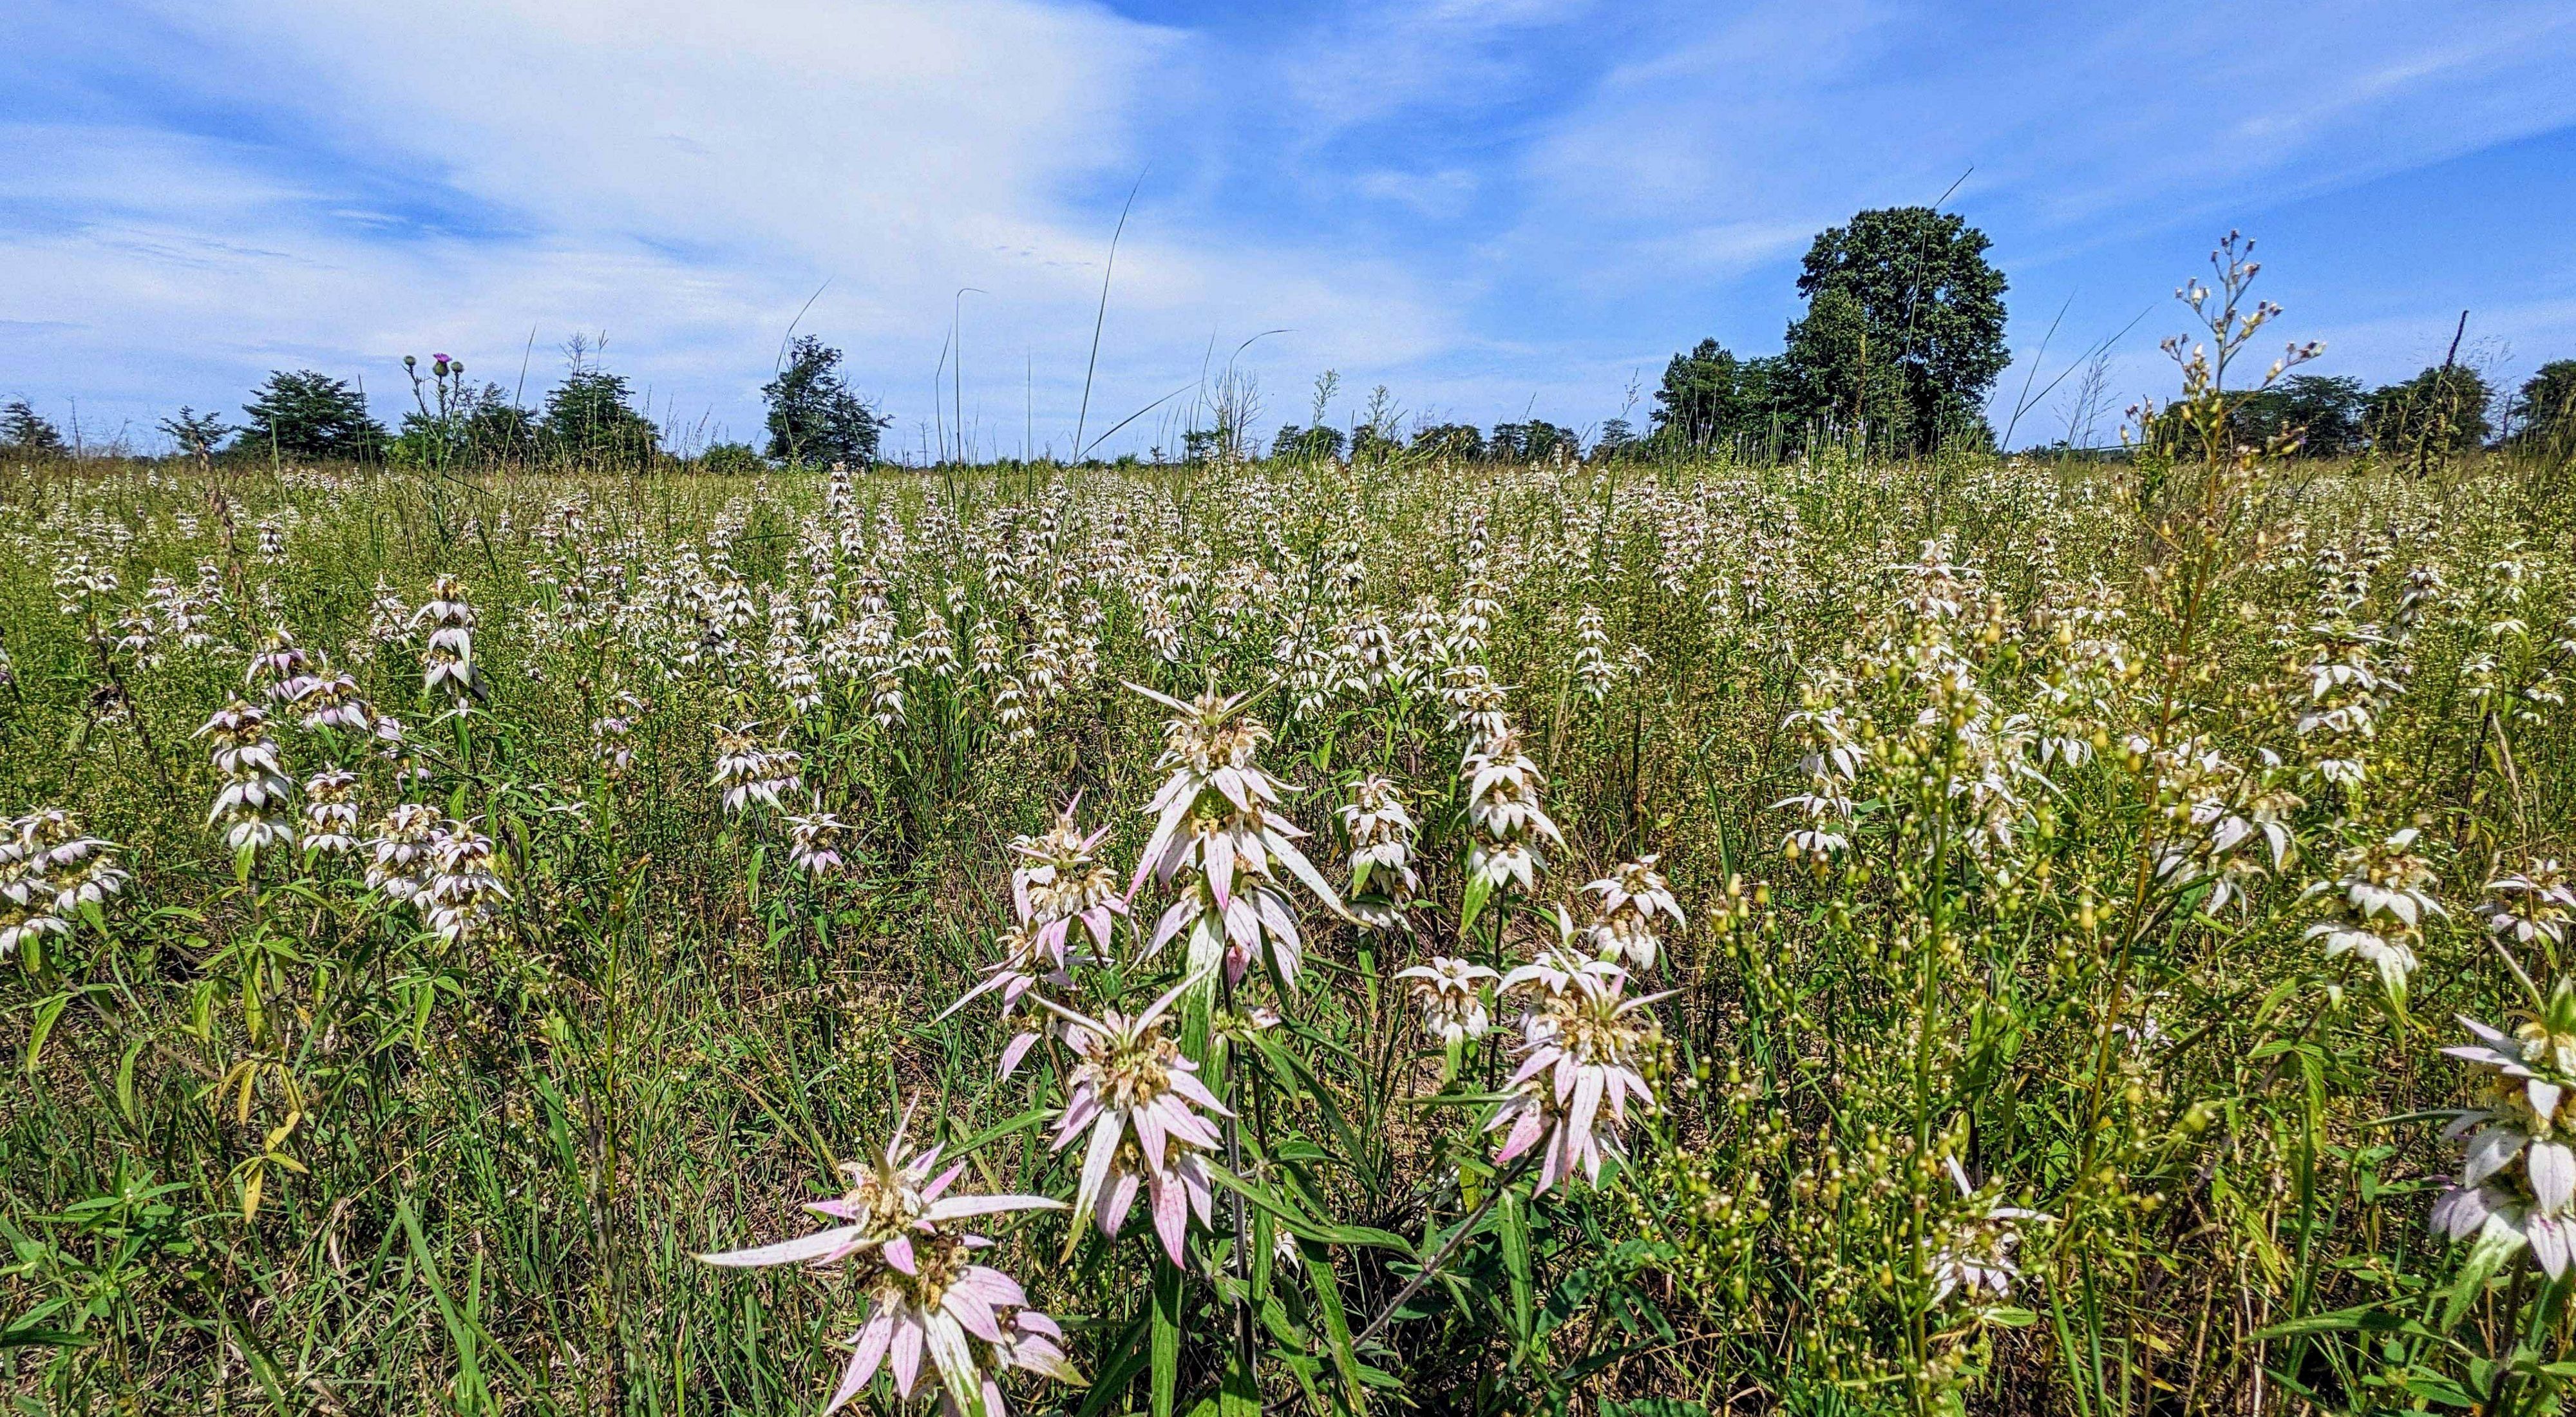 Field of spotted beebalm with pale pink blooms in field against cloudy blue sky.